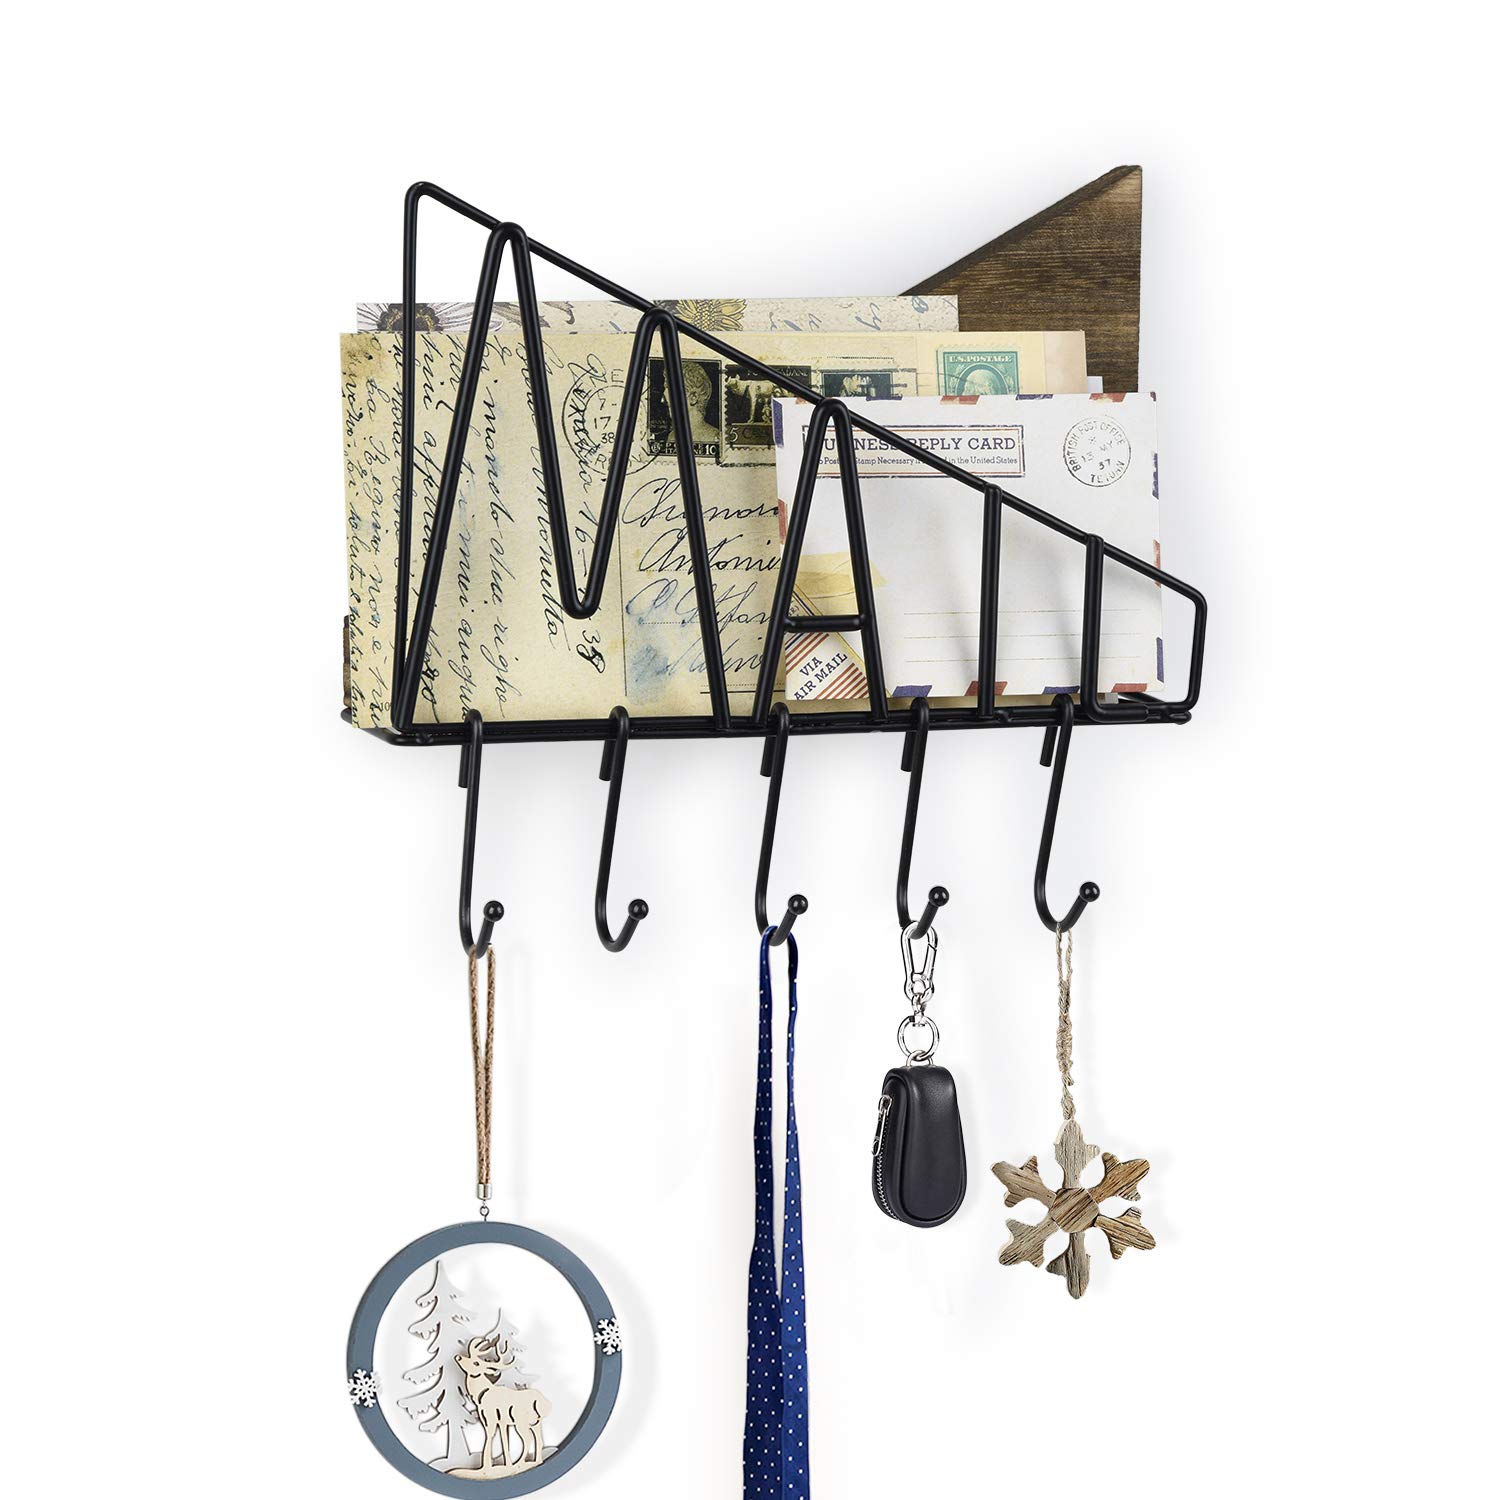 SRIWATANA Letter Mail Holder Wall Mount, Rustic Bill Mail Organizer Hanging Key Holder with Five Removable Hooks